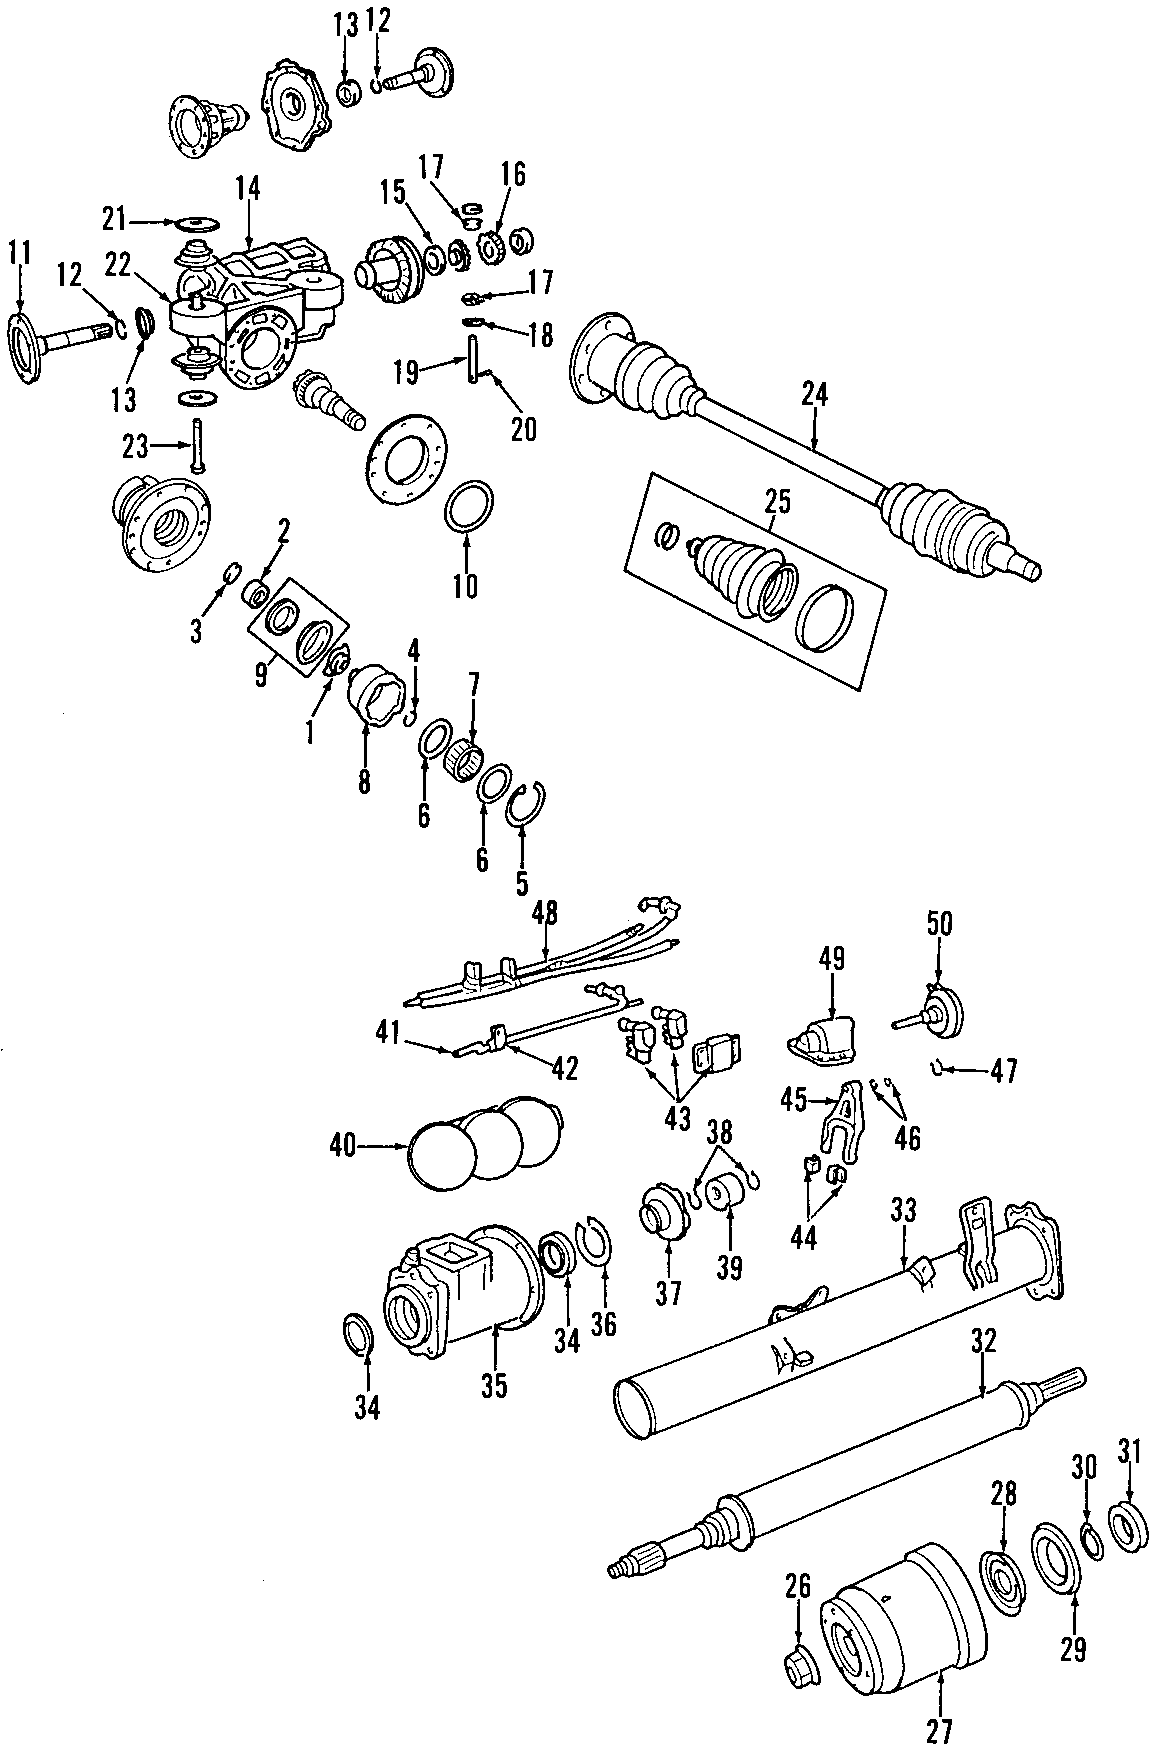 31DRIVE AXLES. REAR AXLE. AXLE SHAFTS & JOINTS. DIFFERENTIAL. PROPELLER SHAFT.https://images.simplepart.com/images/parts/motor/fullsize/T040085.png